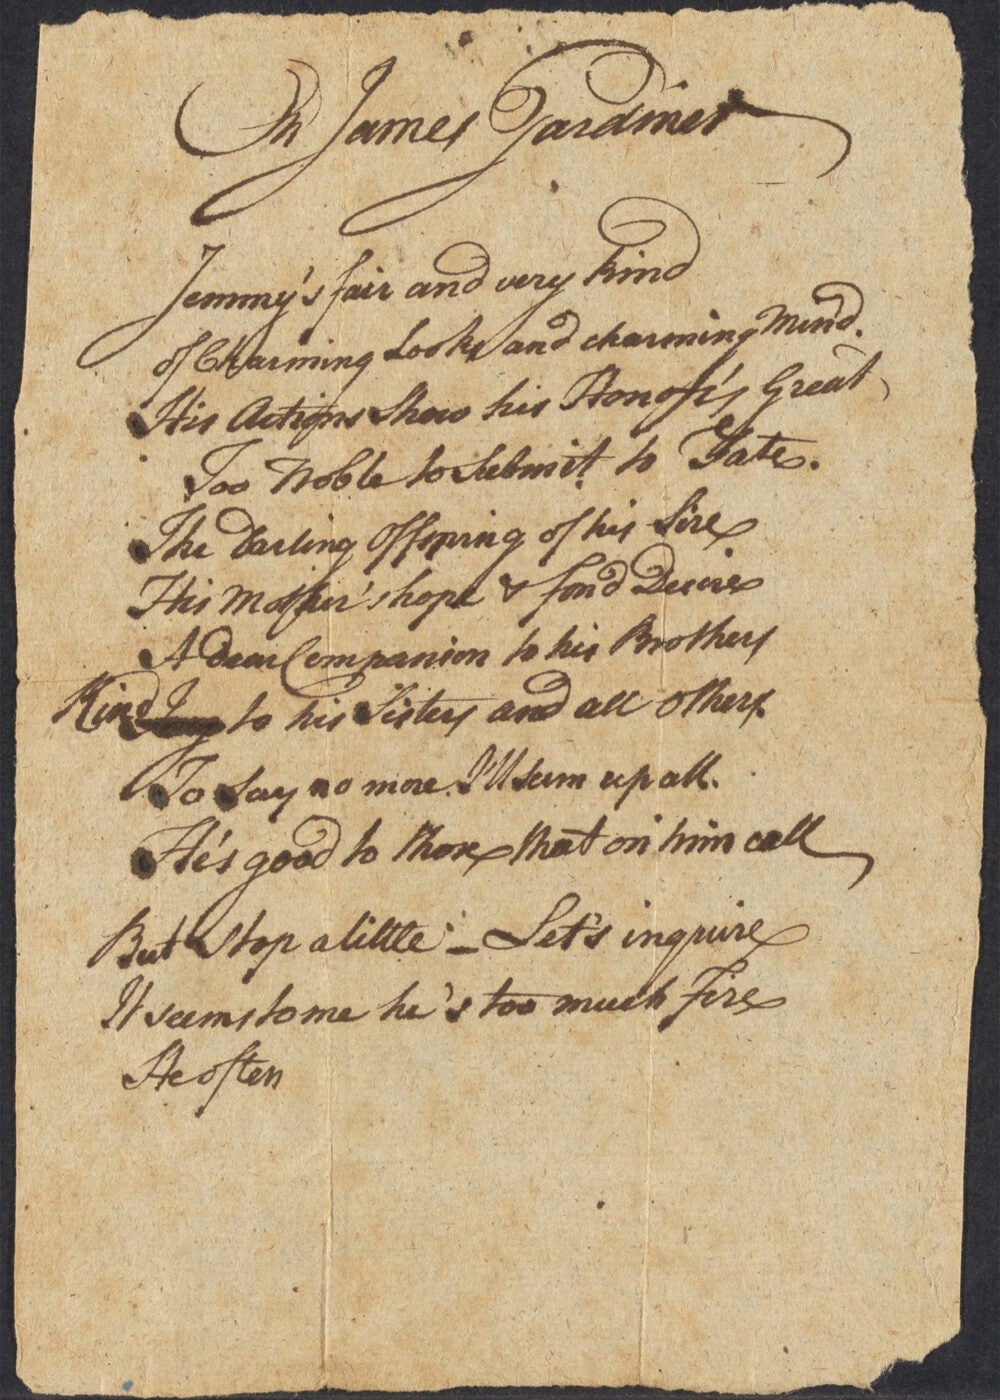 A poem from mid-1700s.